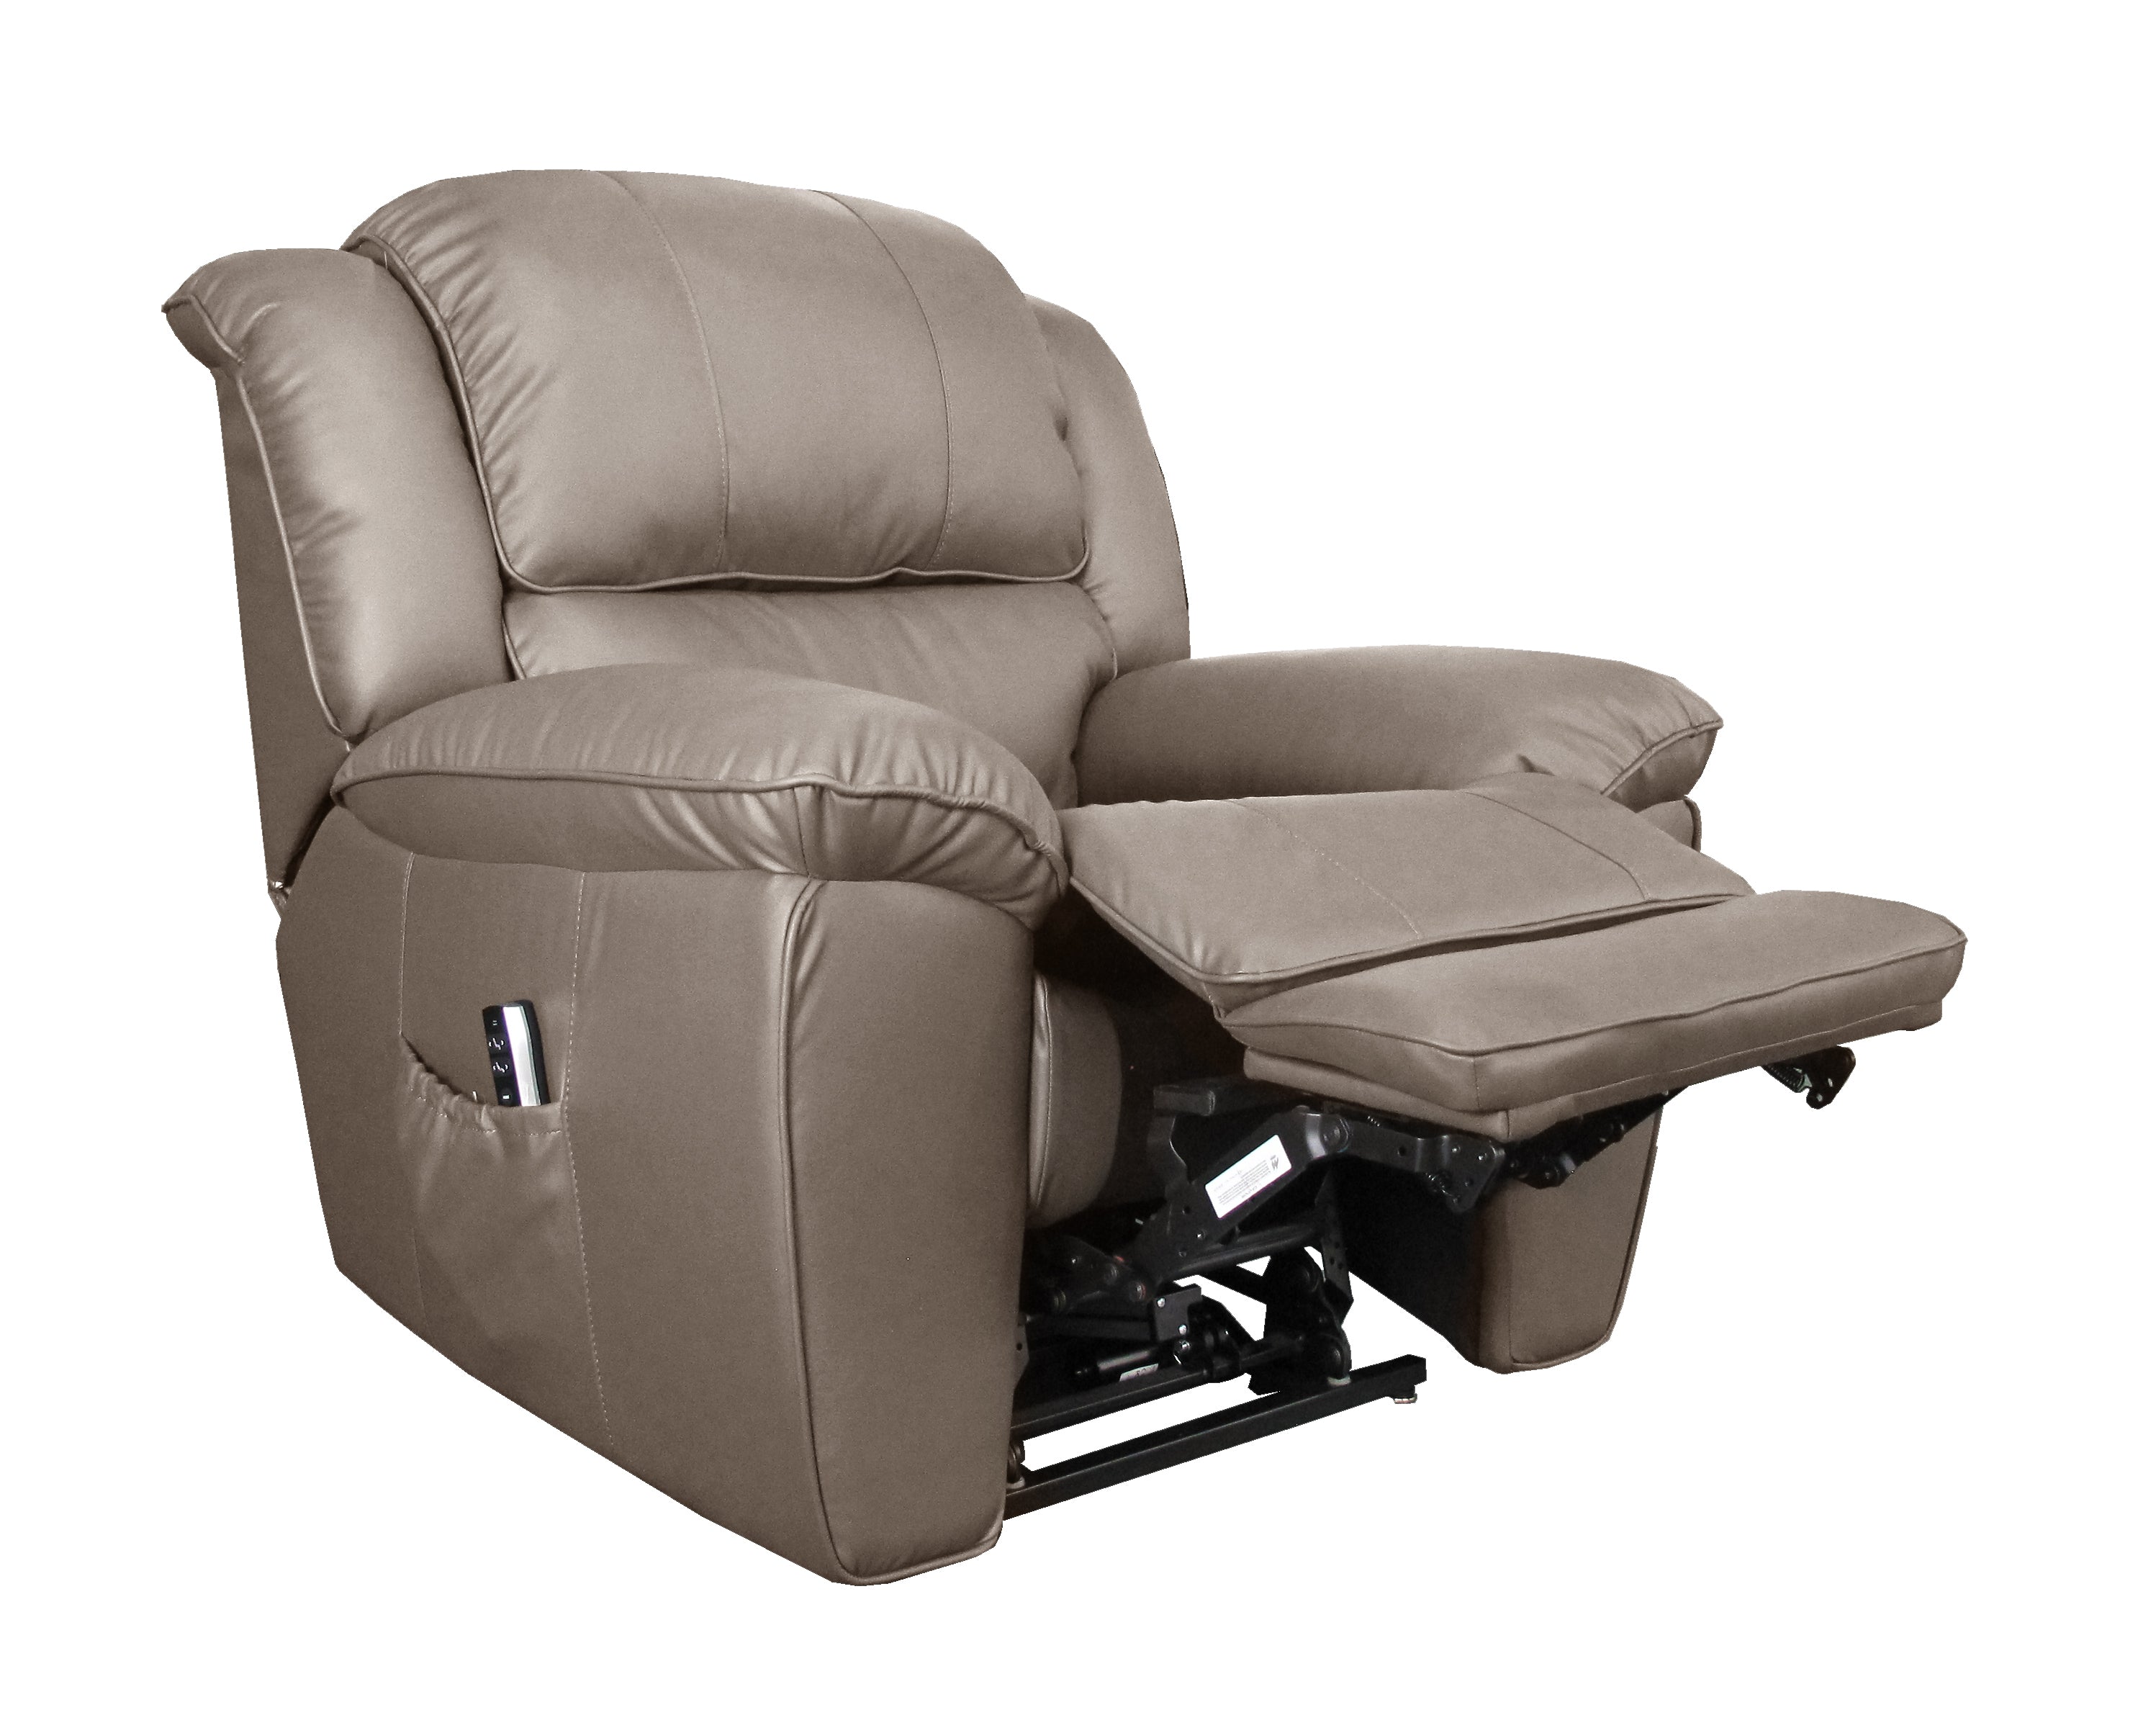 Dual Motor Lift Chair – Lounges Plus